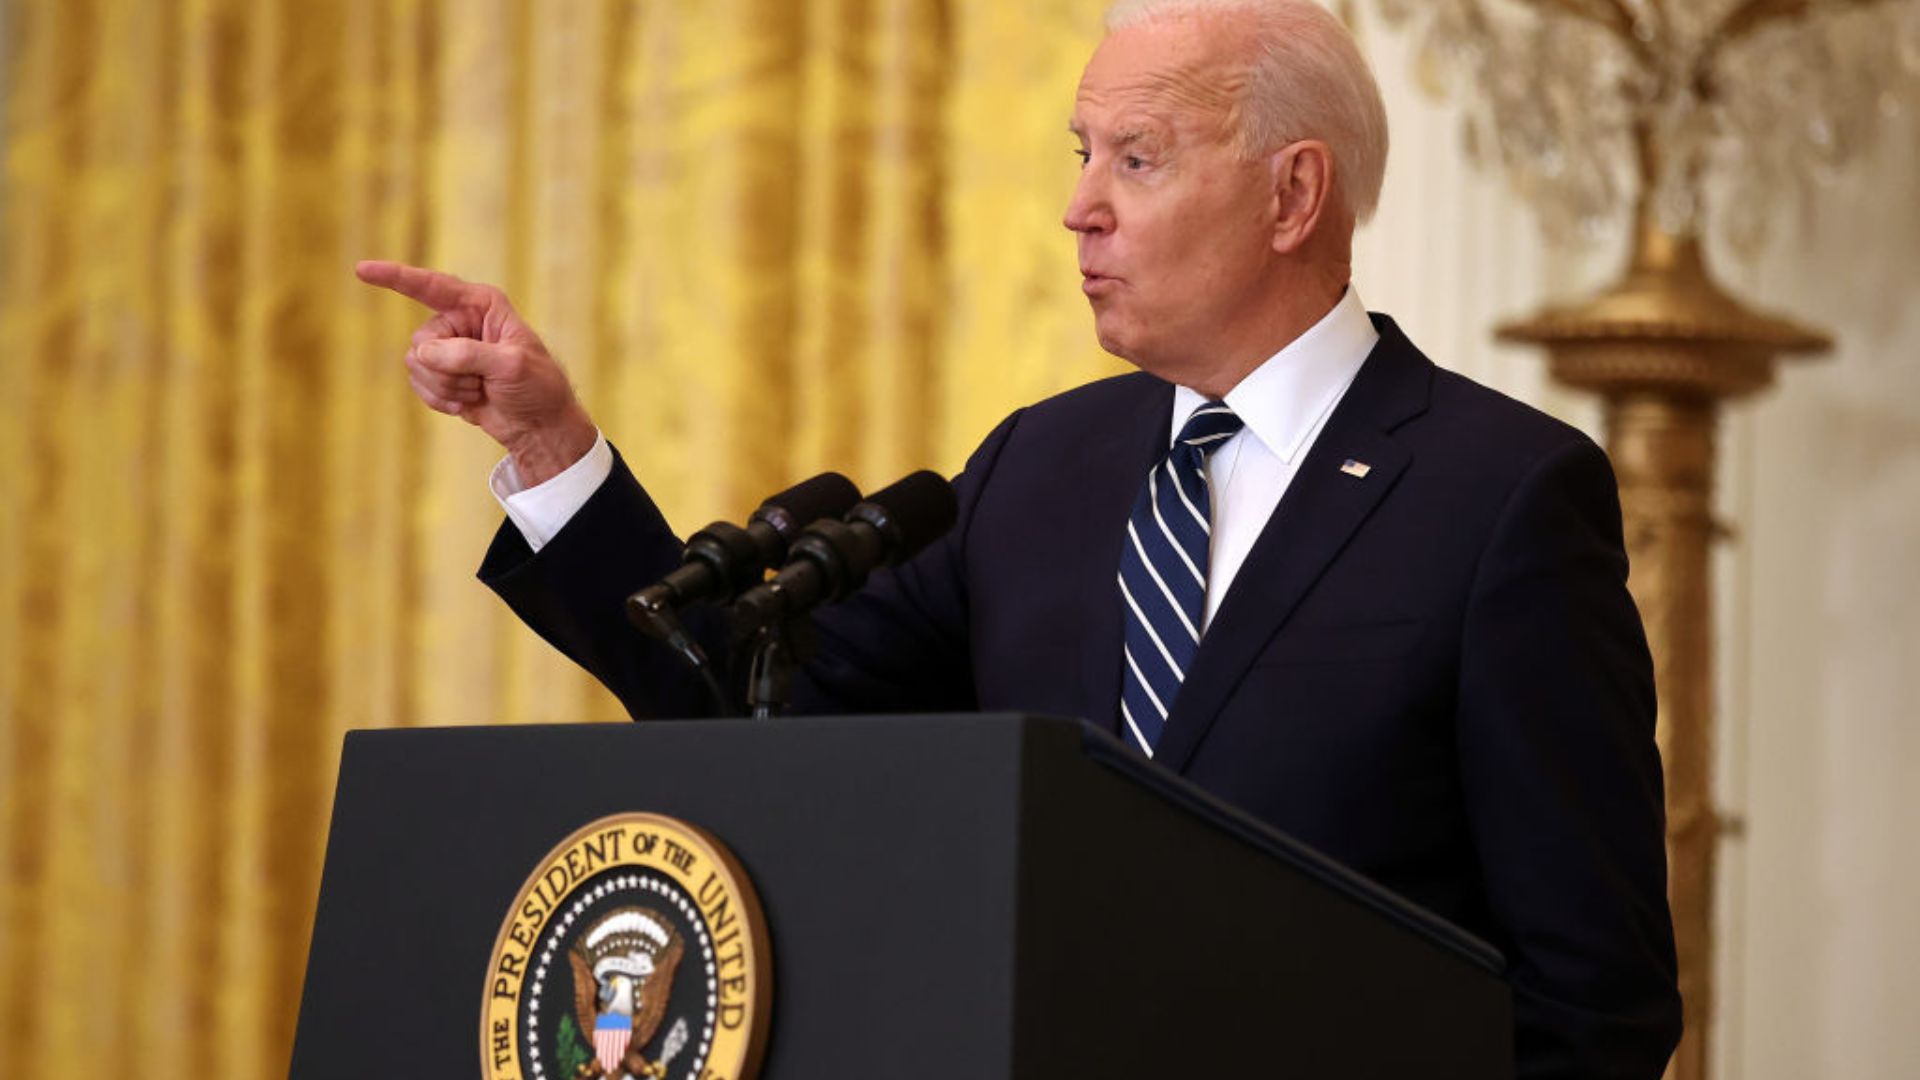 U.S. President gesturing with his right hand while speaking into microphones at a podium with the presidential seal, set against a backdrop of golden curtains and a decorative lamp